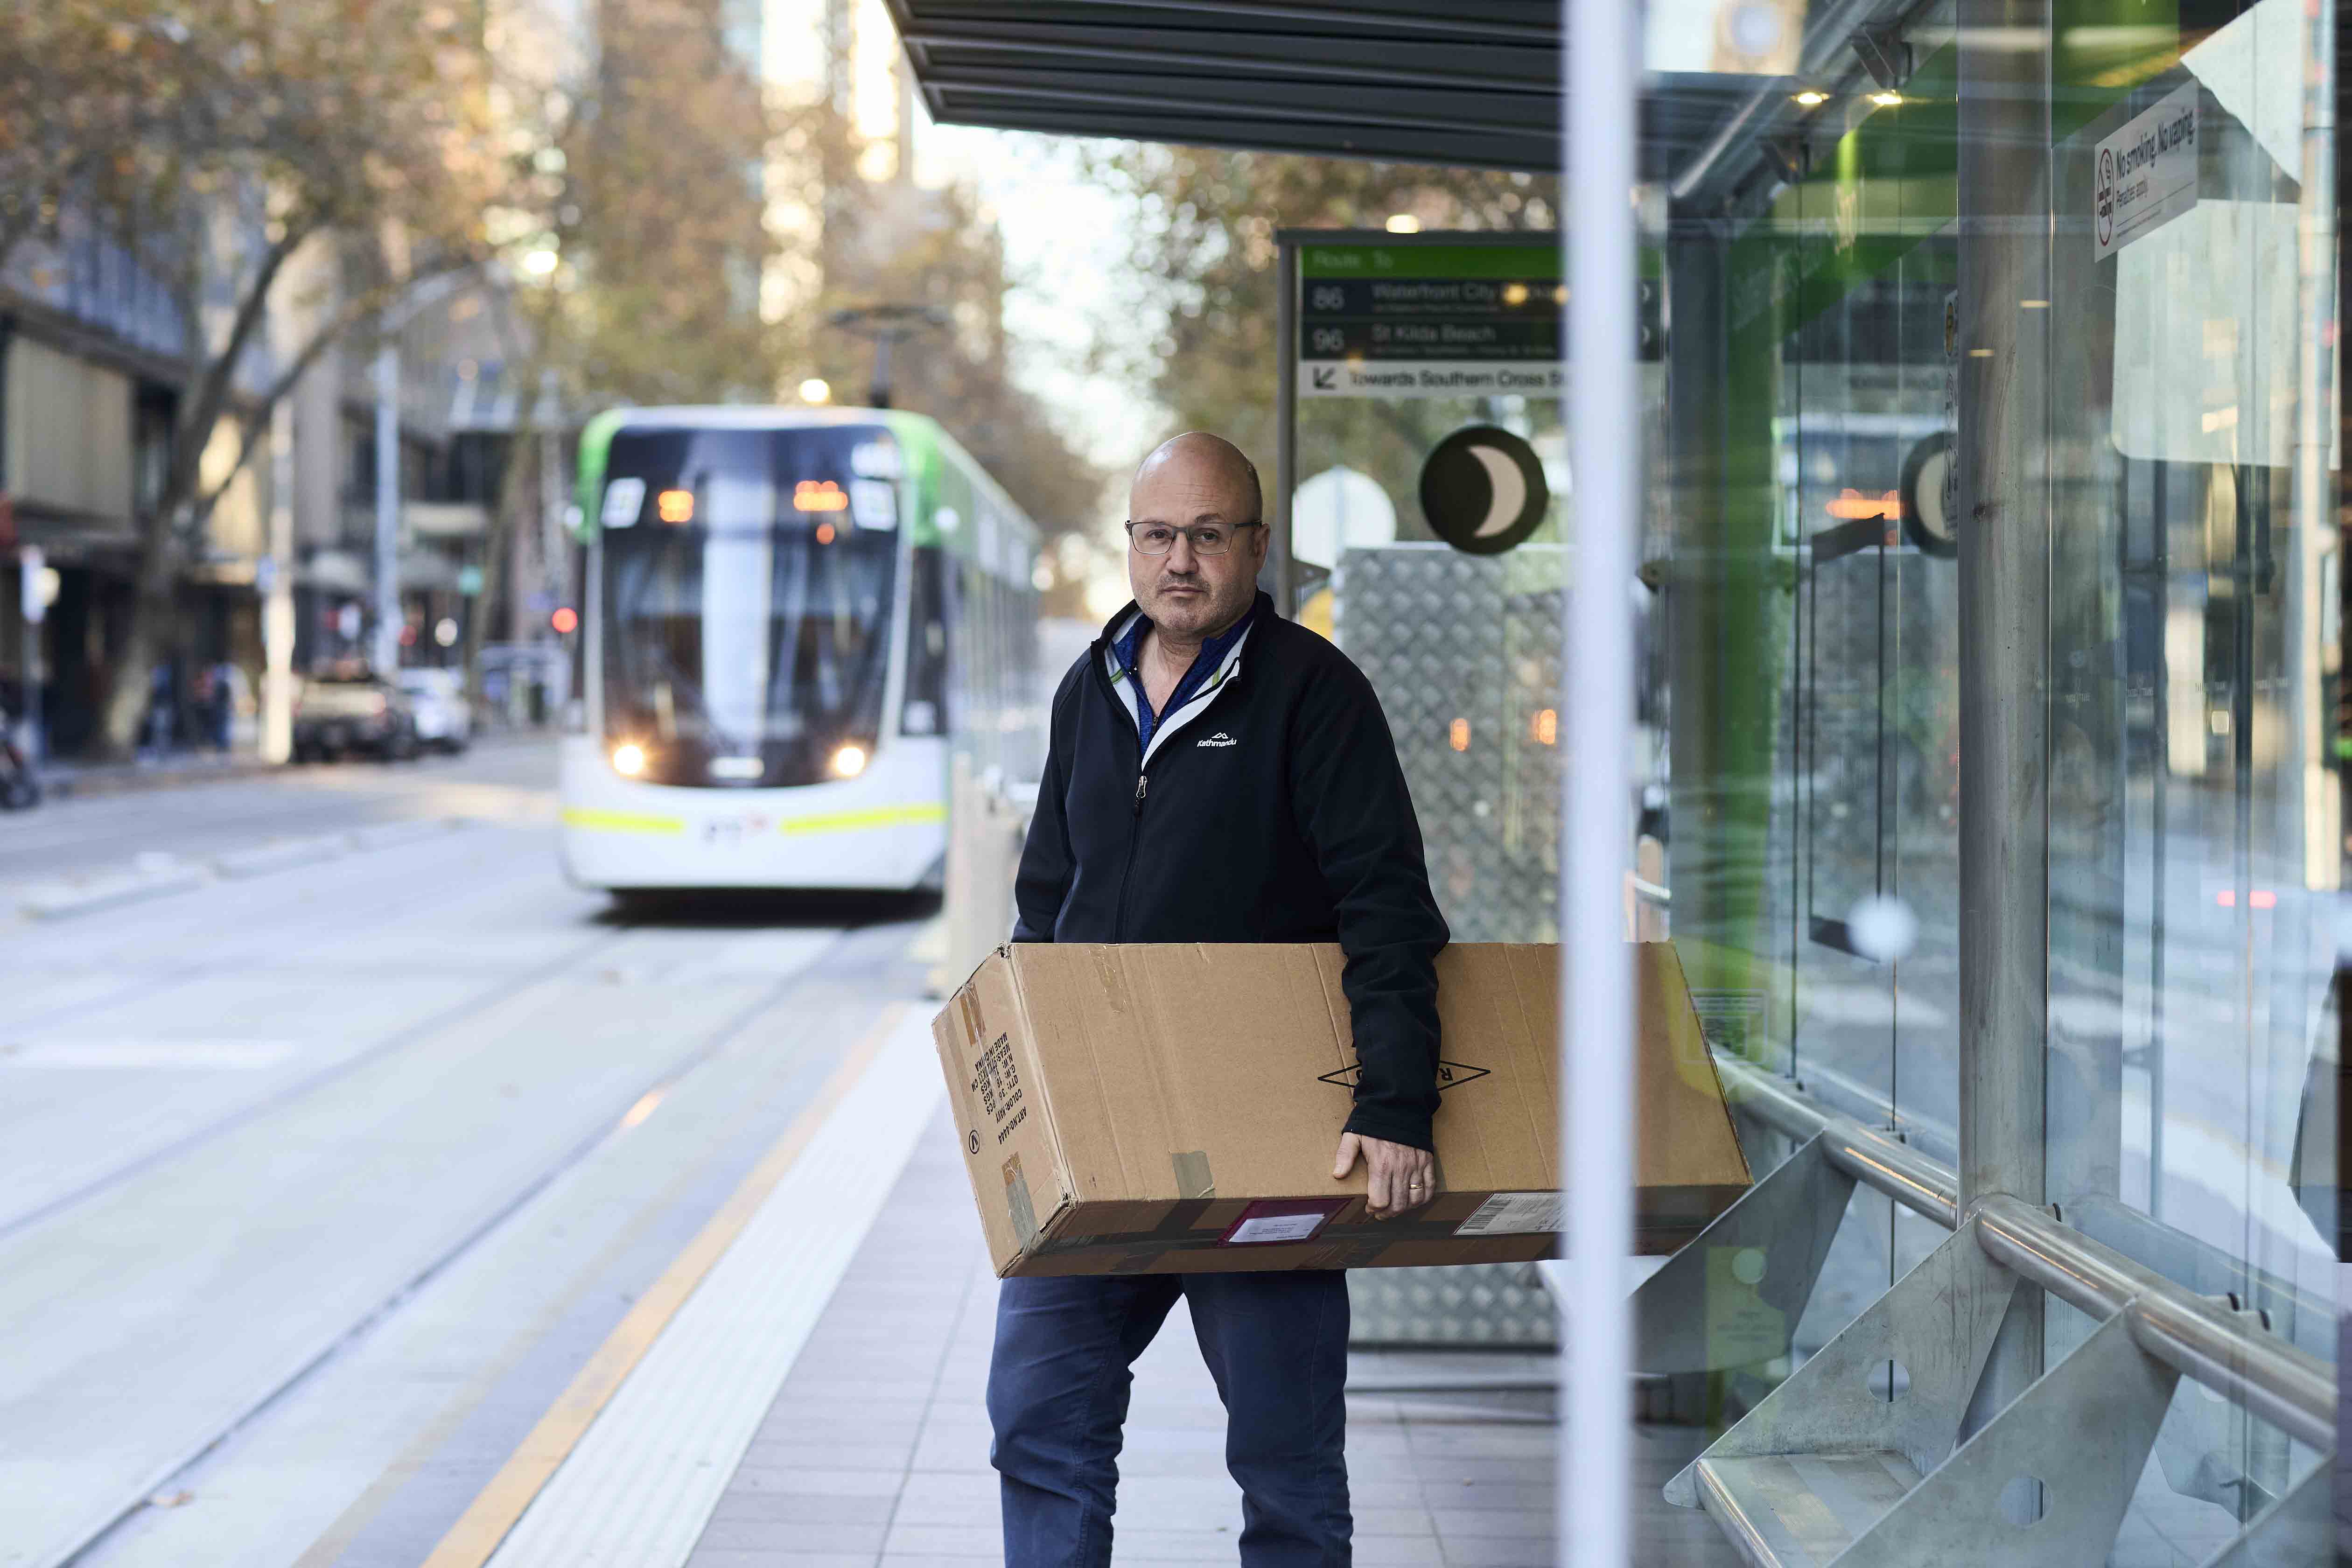 Image shows a middle-aged man waiting at a tram stop. He is carrying a large cardboard box. There is a tram approaching behind him.